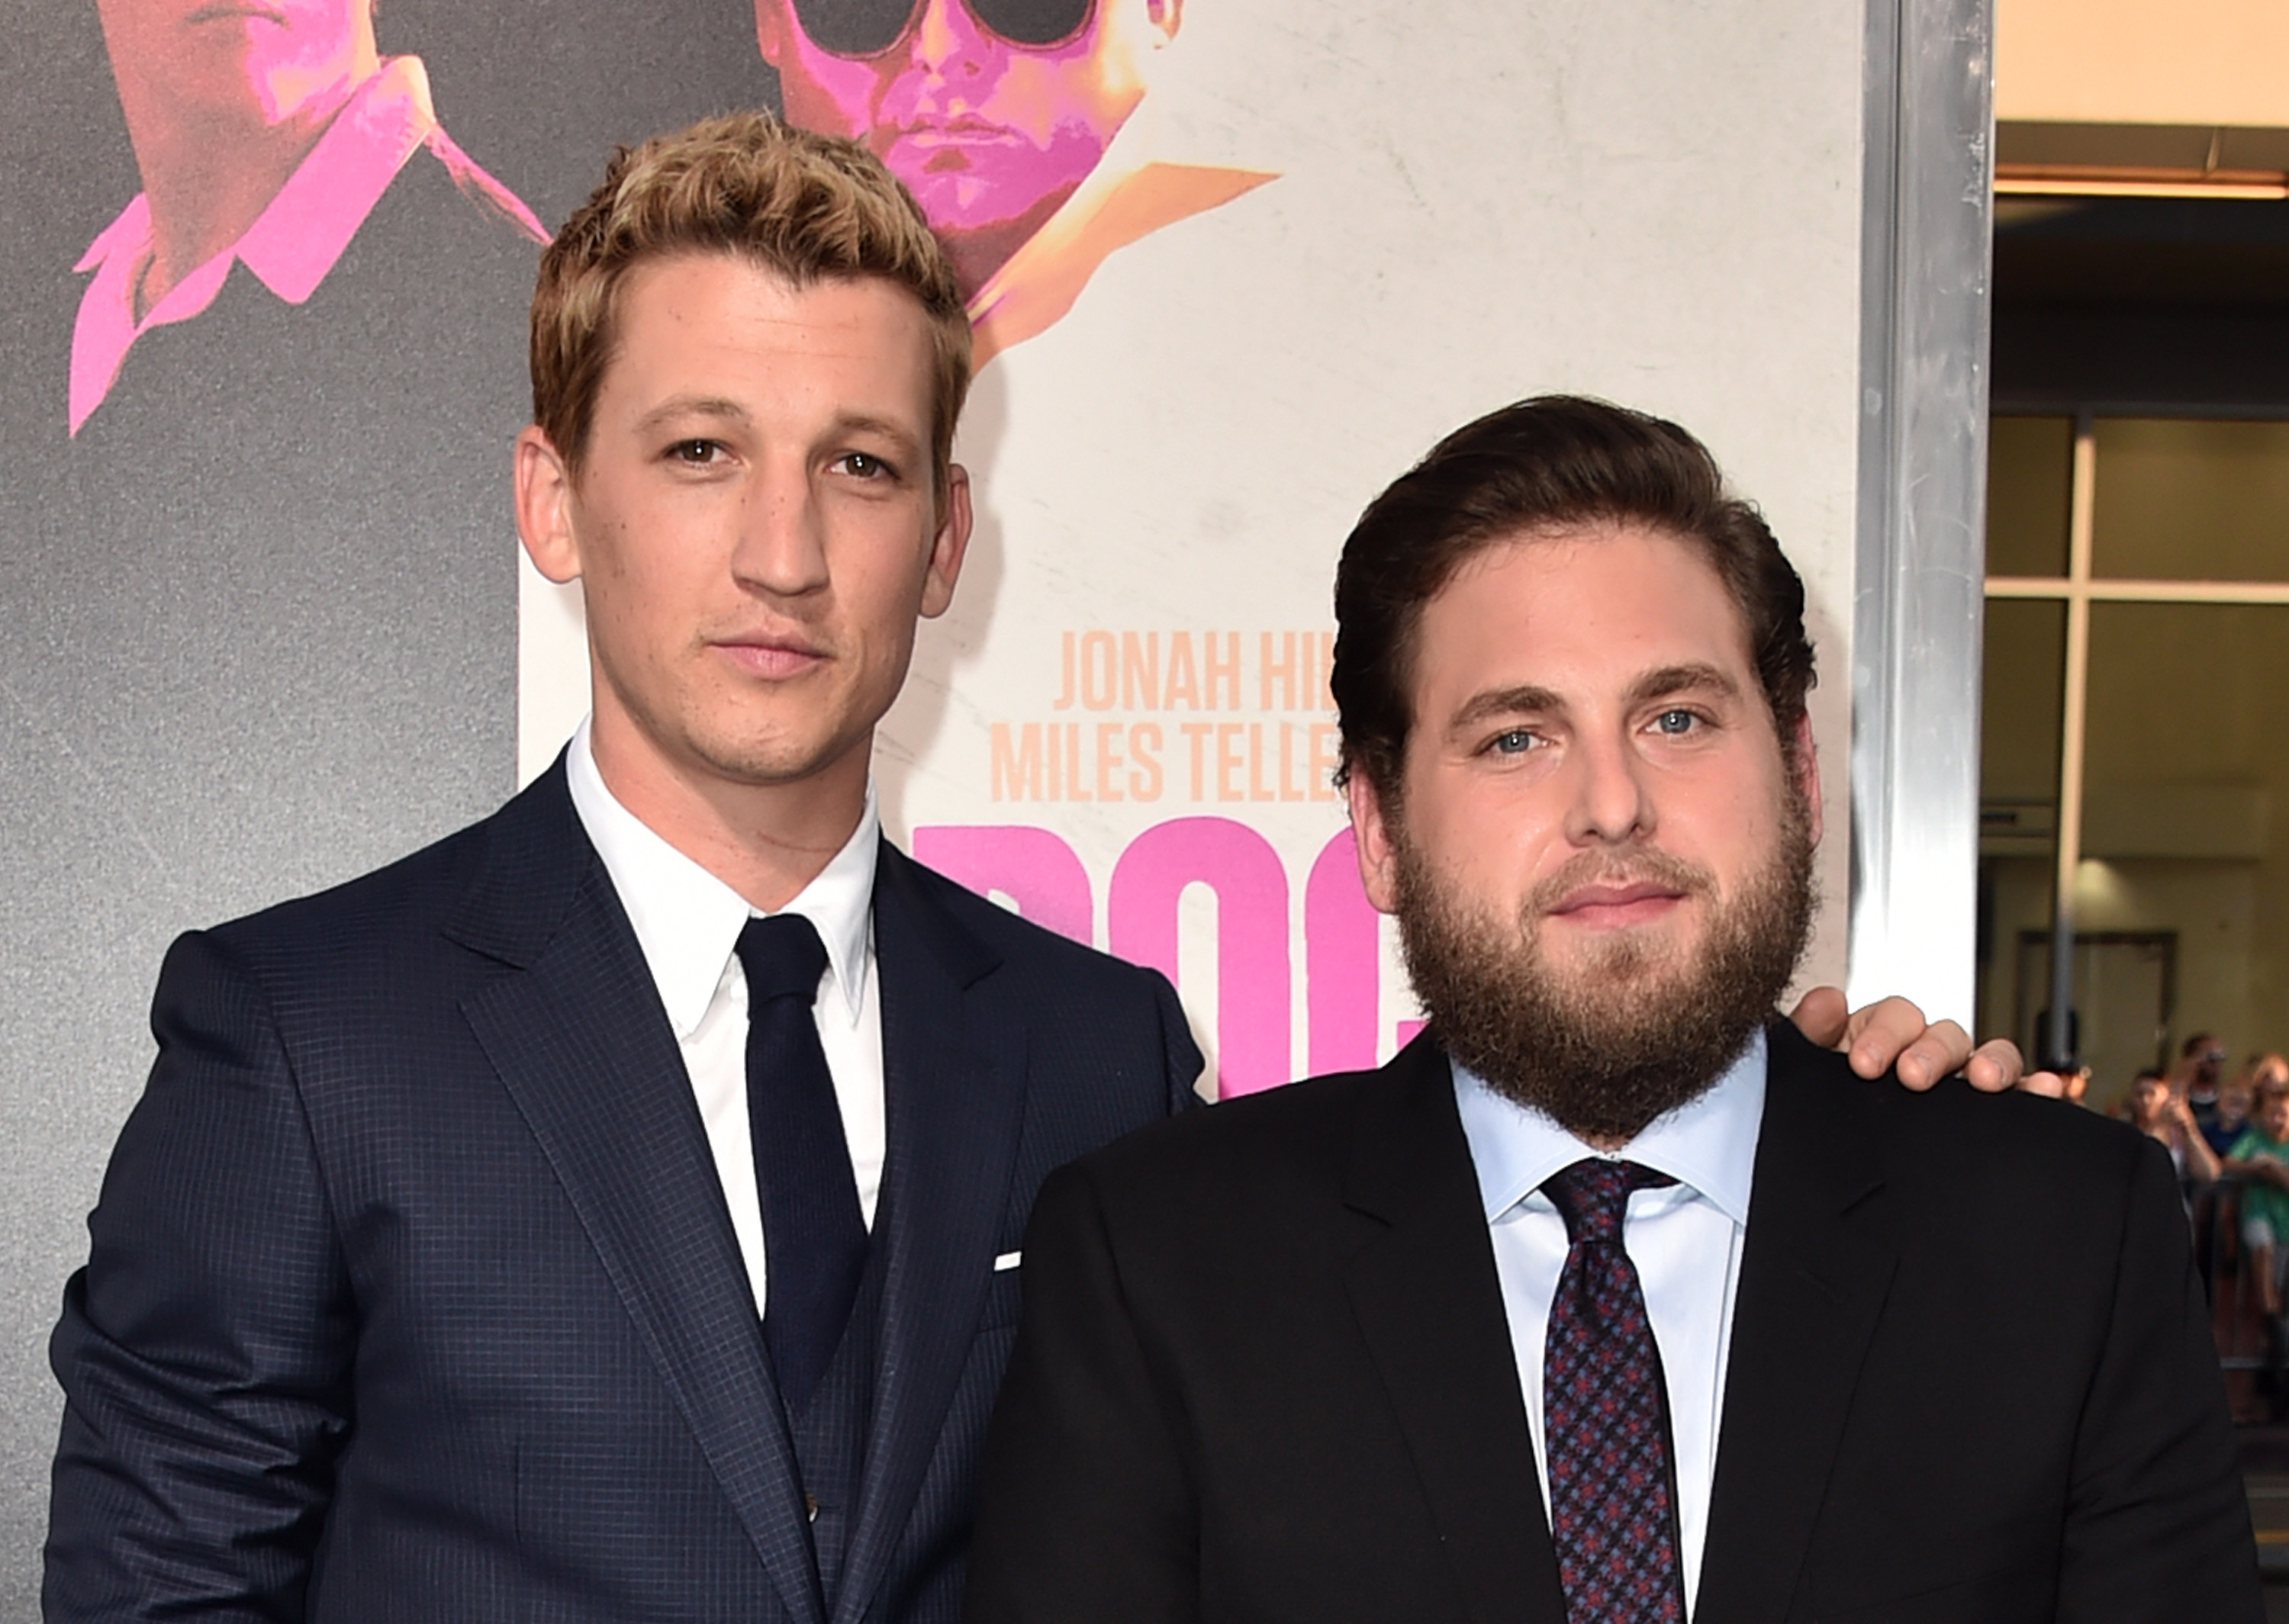 Actors Miles Teller (L) and Jonah Hill attend the premiere of Warner Bros. Pictures' "War Dogs" at TCL Chinese Theatre on August 15, 2016 in Hollywood, California. (Alberto E. Rodriguez/Getty Images)